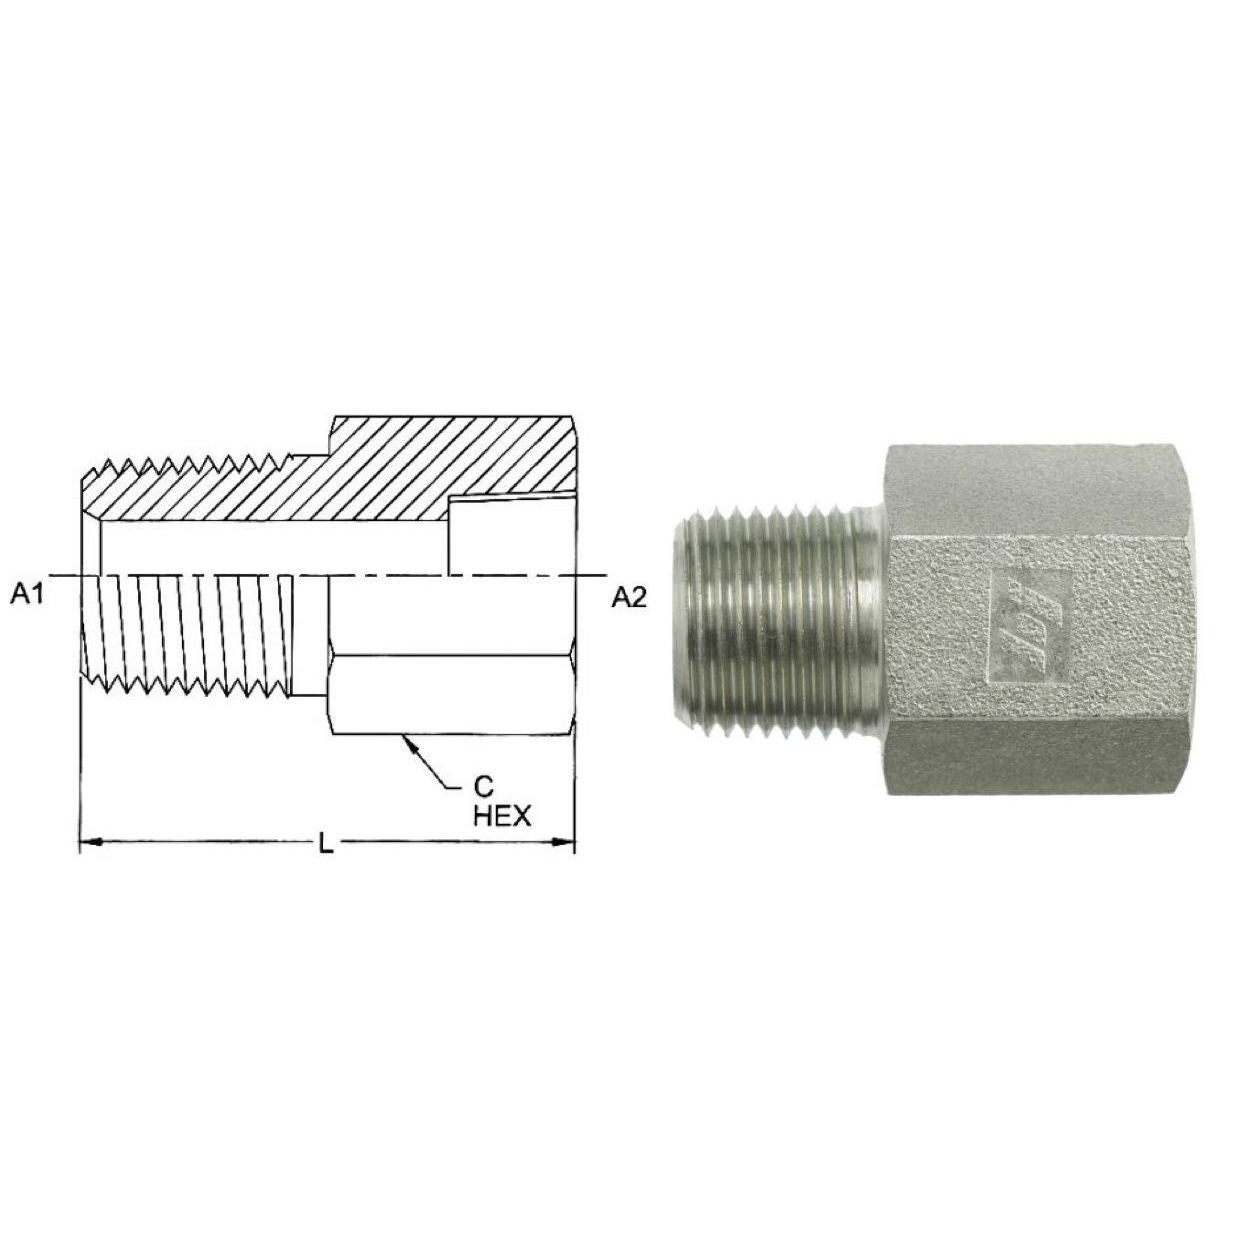 5405-08-08 : OneHydraulics Adapter, Straight Expander, 0.5 (1/2") Male NPT x 0.5 (1/2") Female, Steel, 5000psi